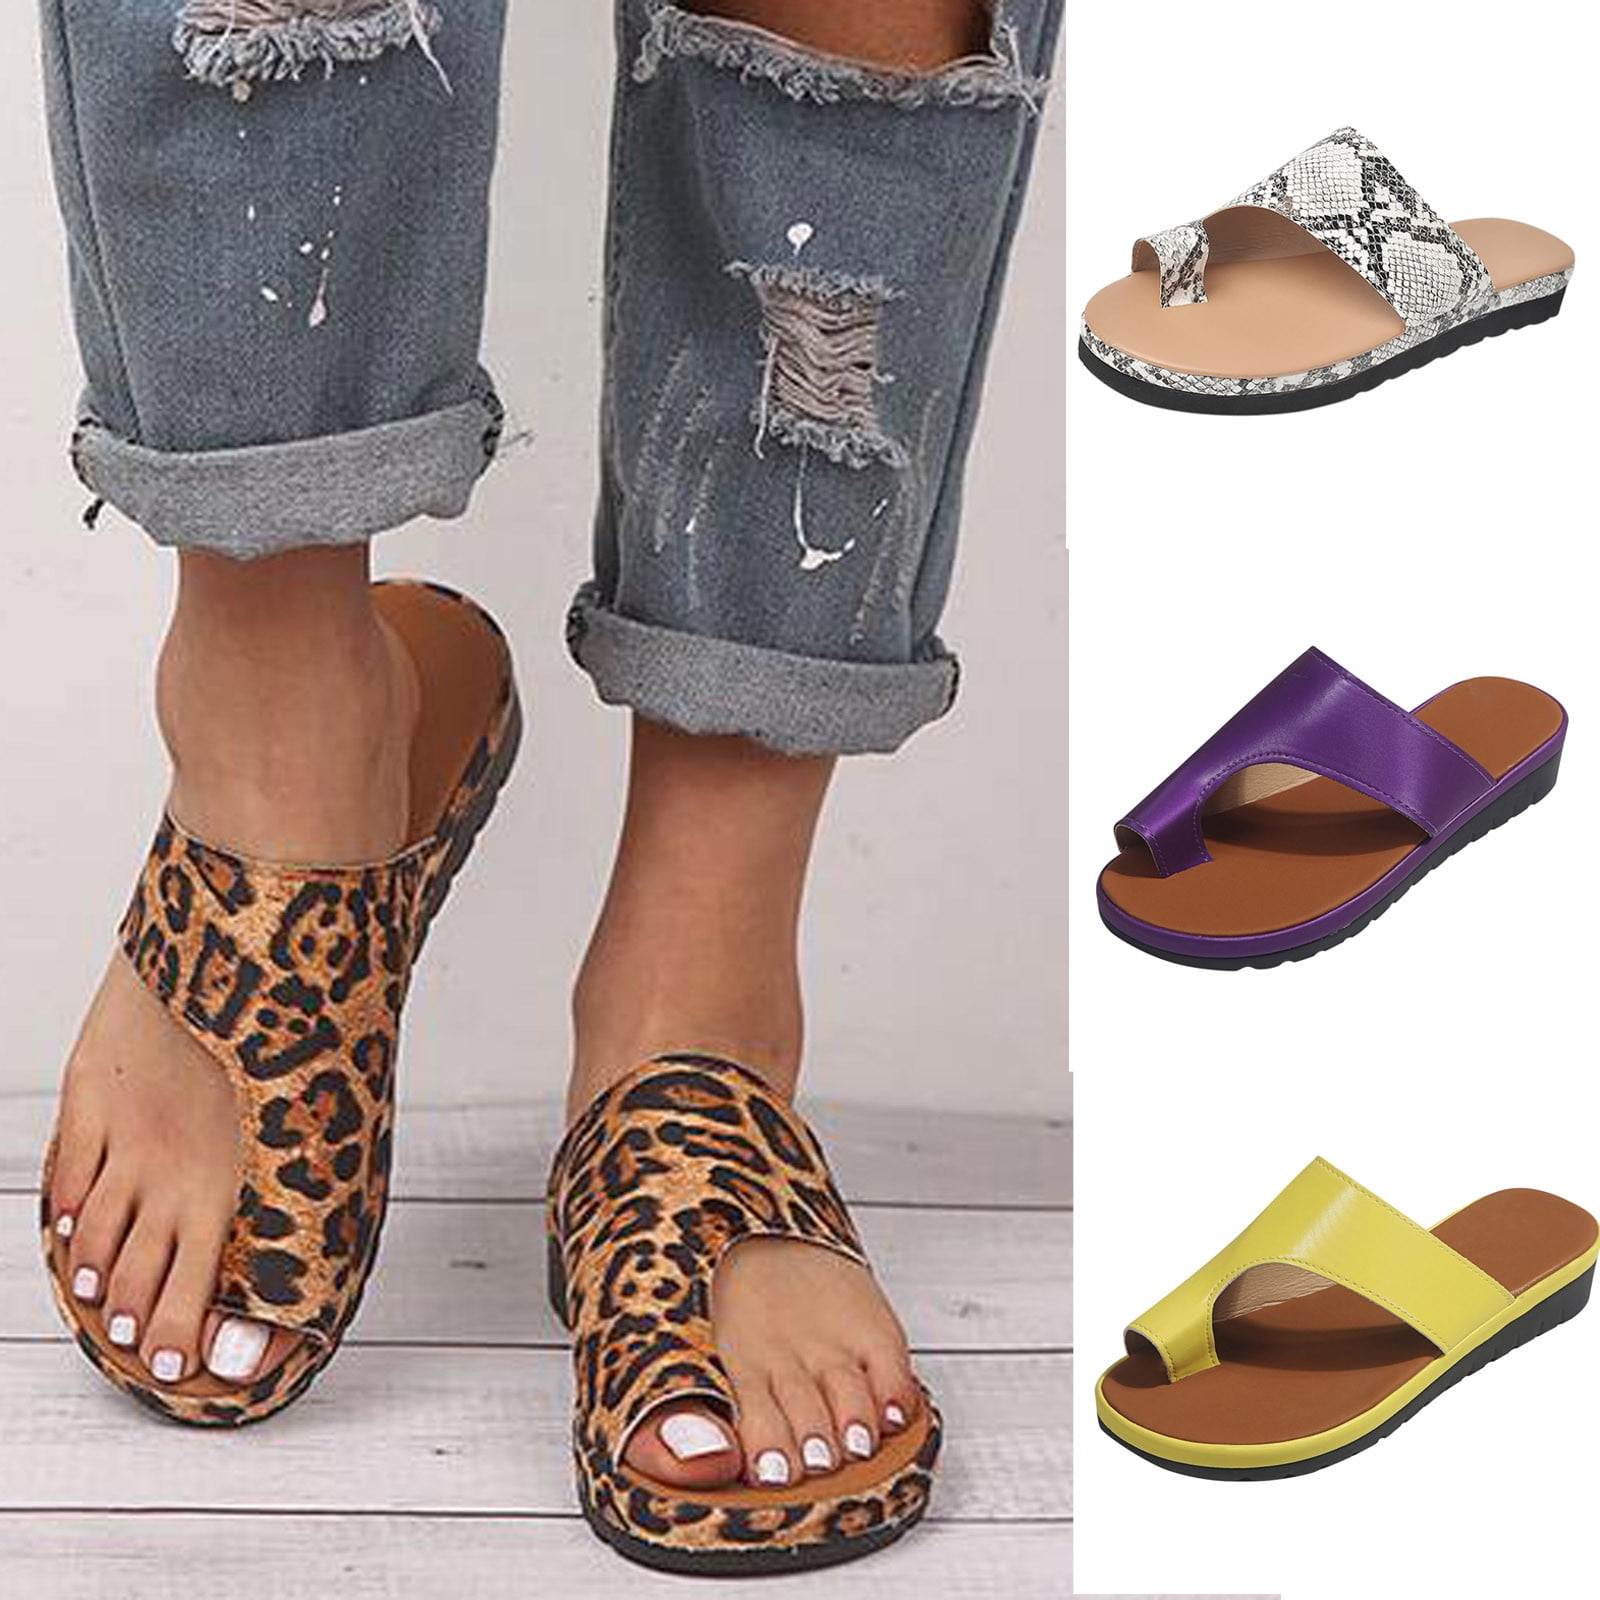 Summer Flats for Women Casual,Solid Strappy Platform Sandals Close Toe Wedge Sandals Comfy Shoes Womens Sandals Outdoor